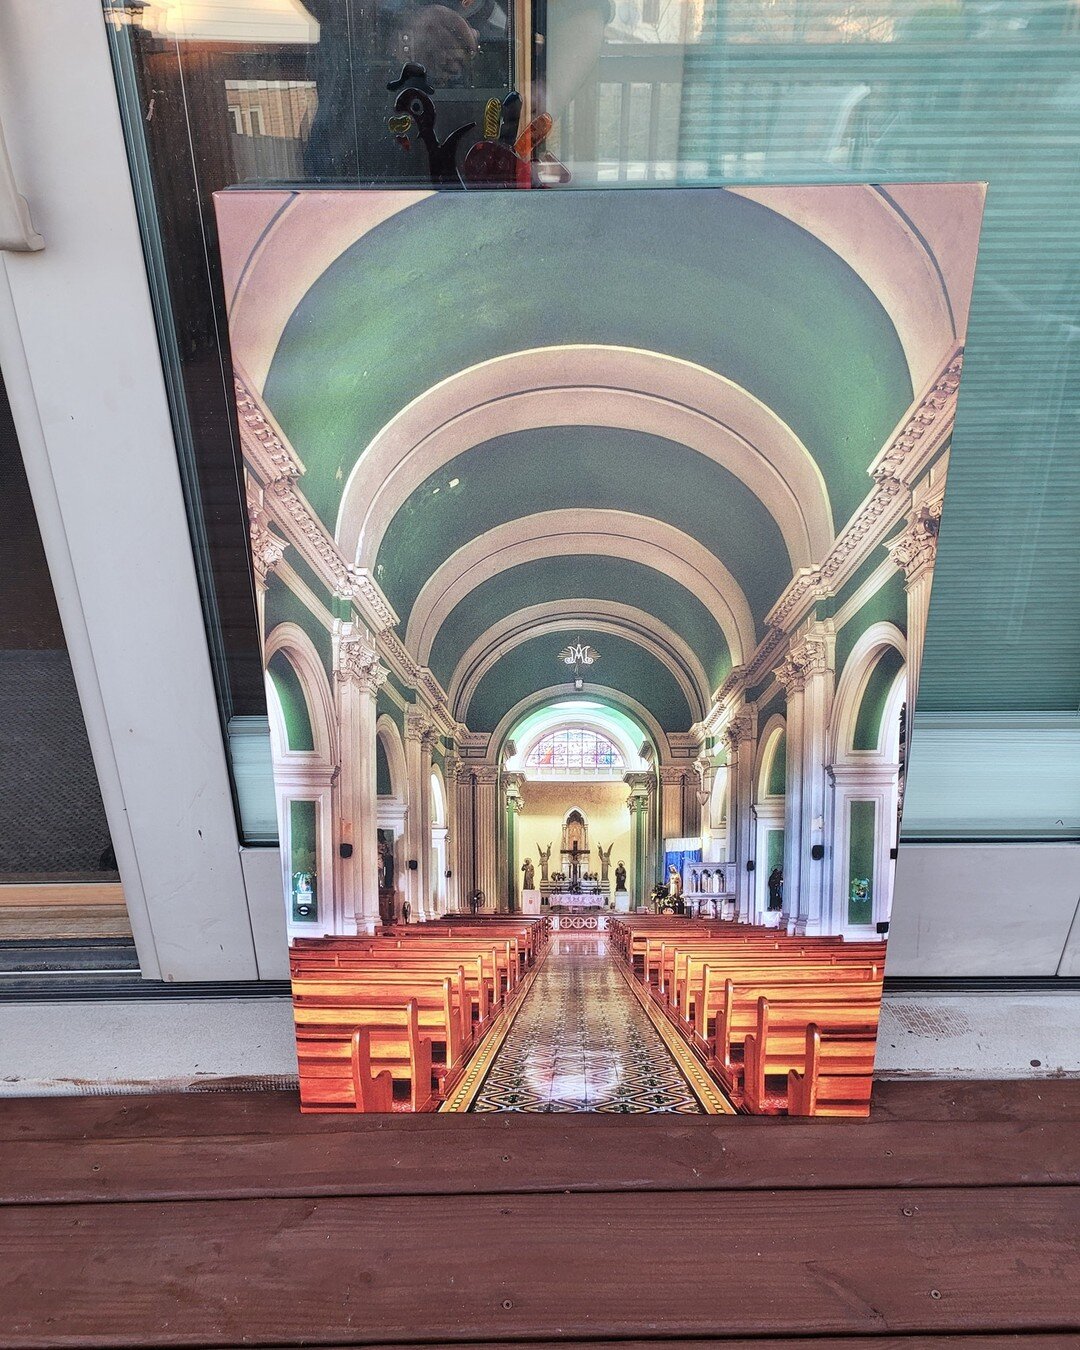 My 24x36 in canvas just arrived today. I shot this in Nicaragua about 8 years ago while honeymooning in Costa Rica. Message me if you're interested in owning this amazing piece! 
&bull; &bull; &bull; &bull; &bull; #religious #church #canvas #jesus #c